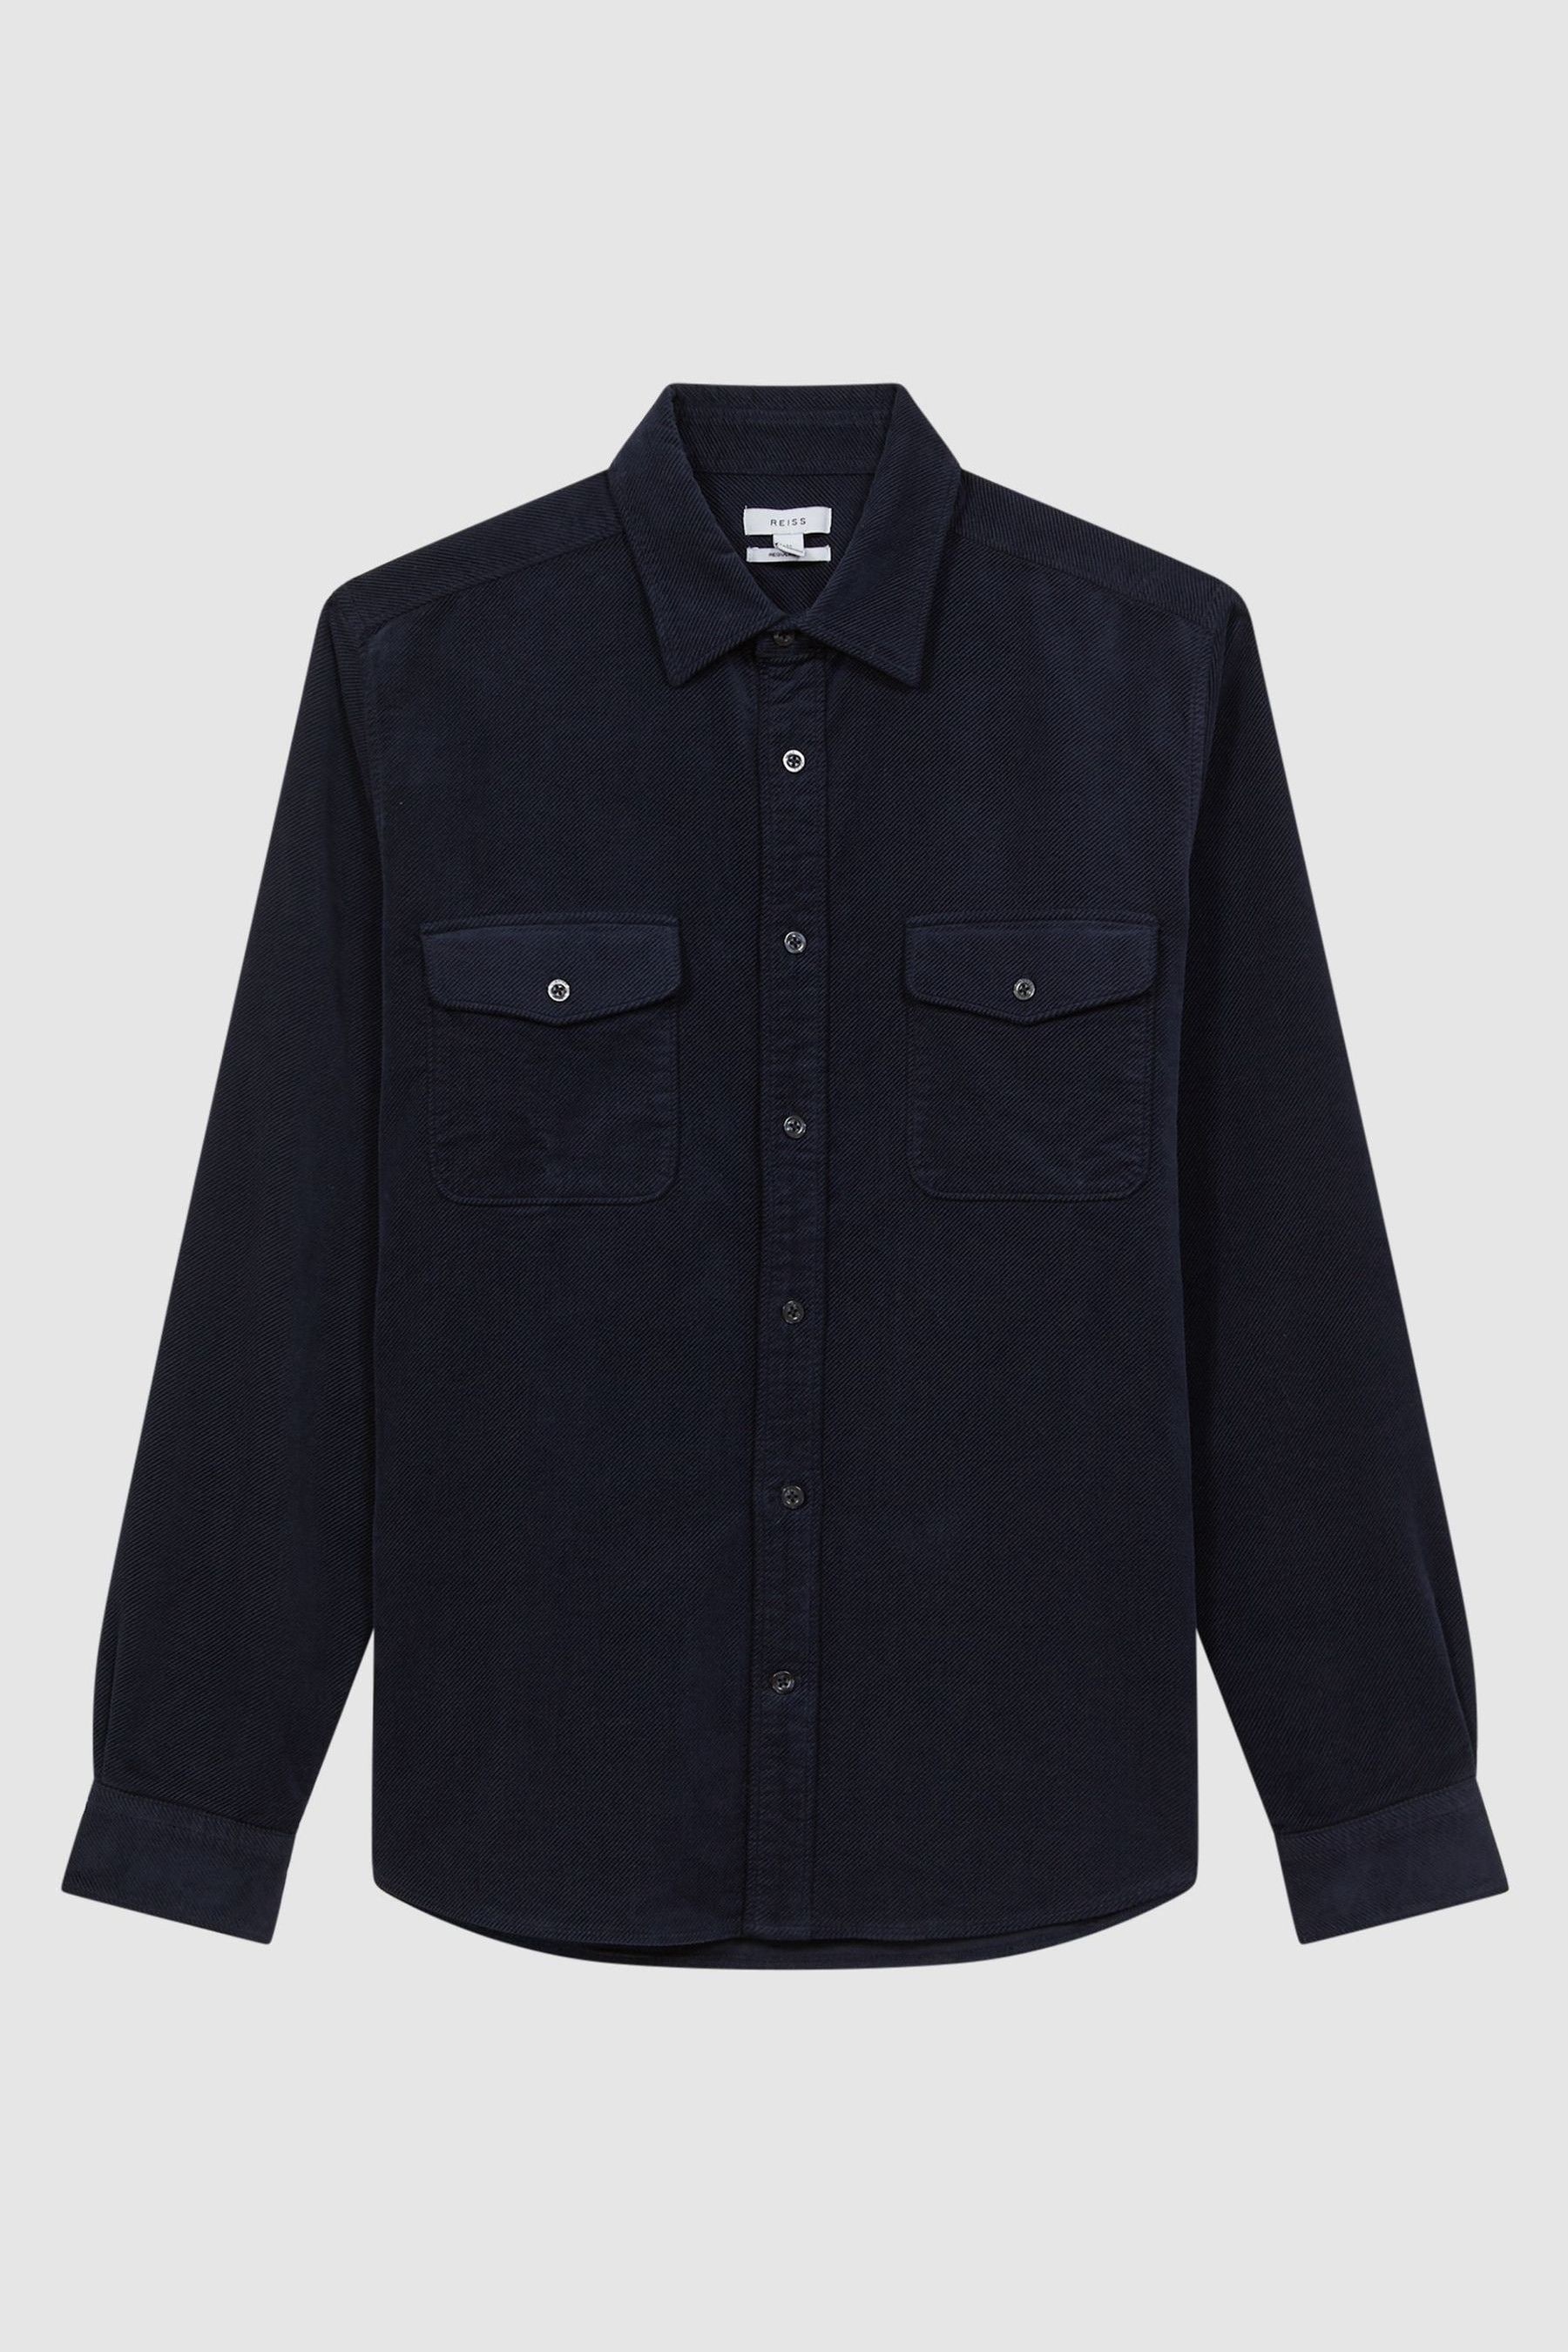 Buy Reiss Navy Cialini Corduroy Twin Pocket Overshirt from the Next UK ...